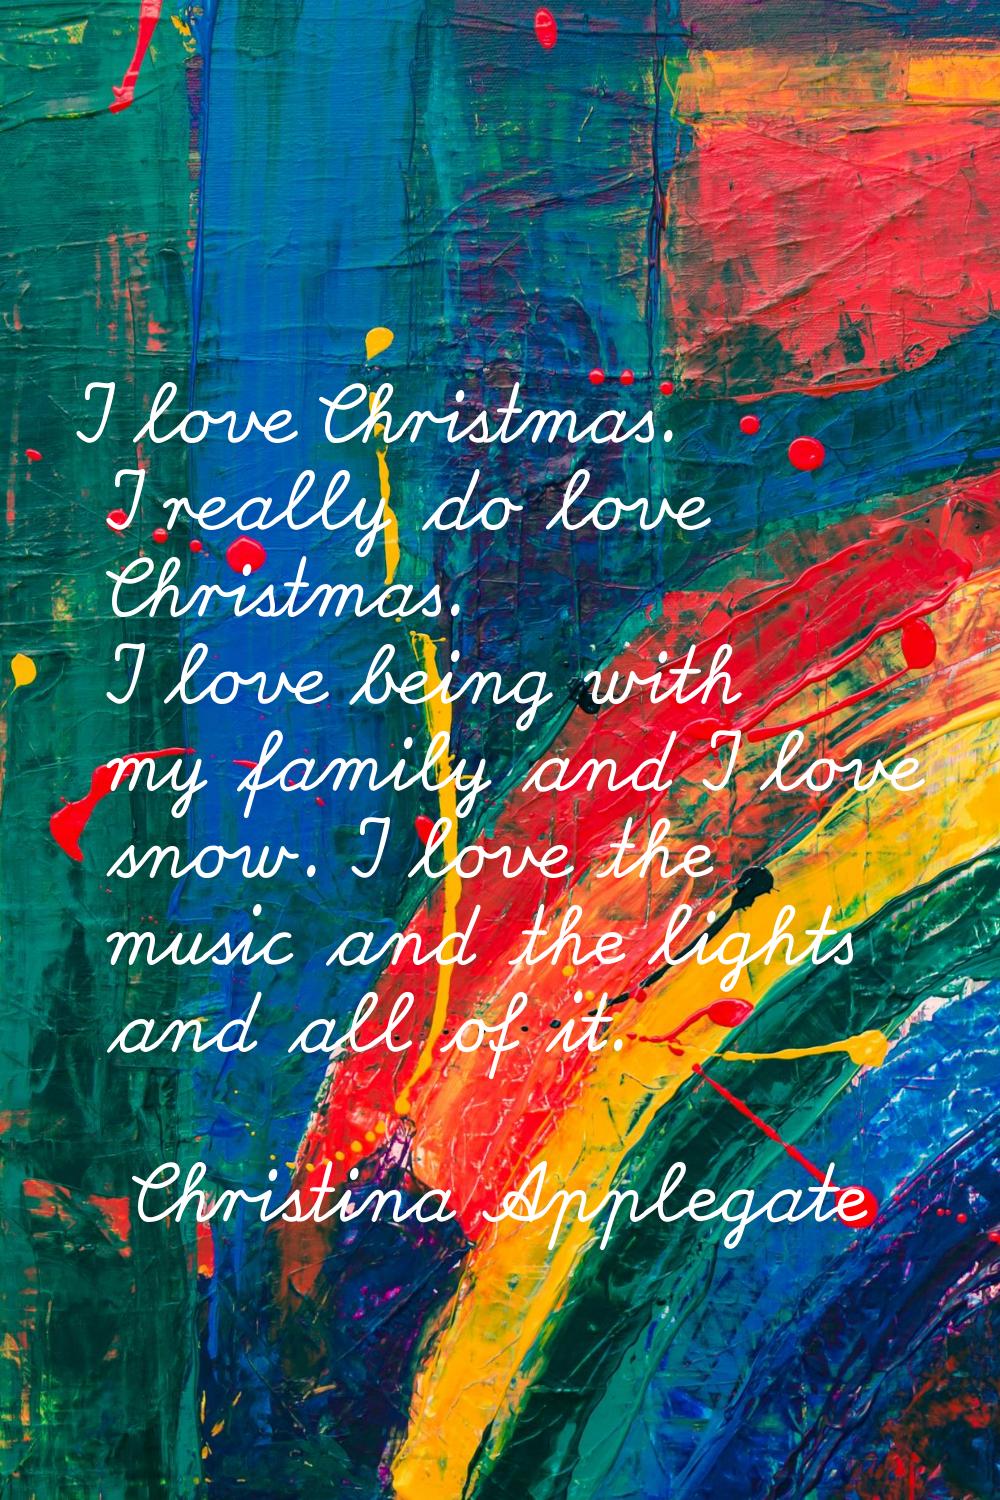 I love Christmas. I really do love Christmas. I love being with my family and I love snow. I love t